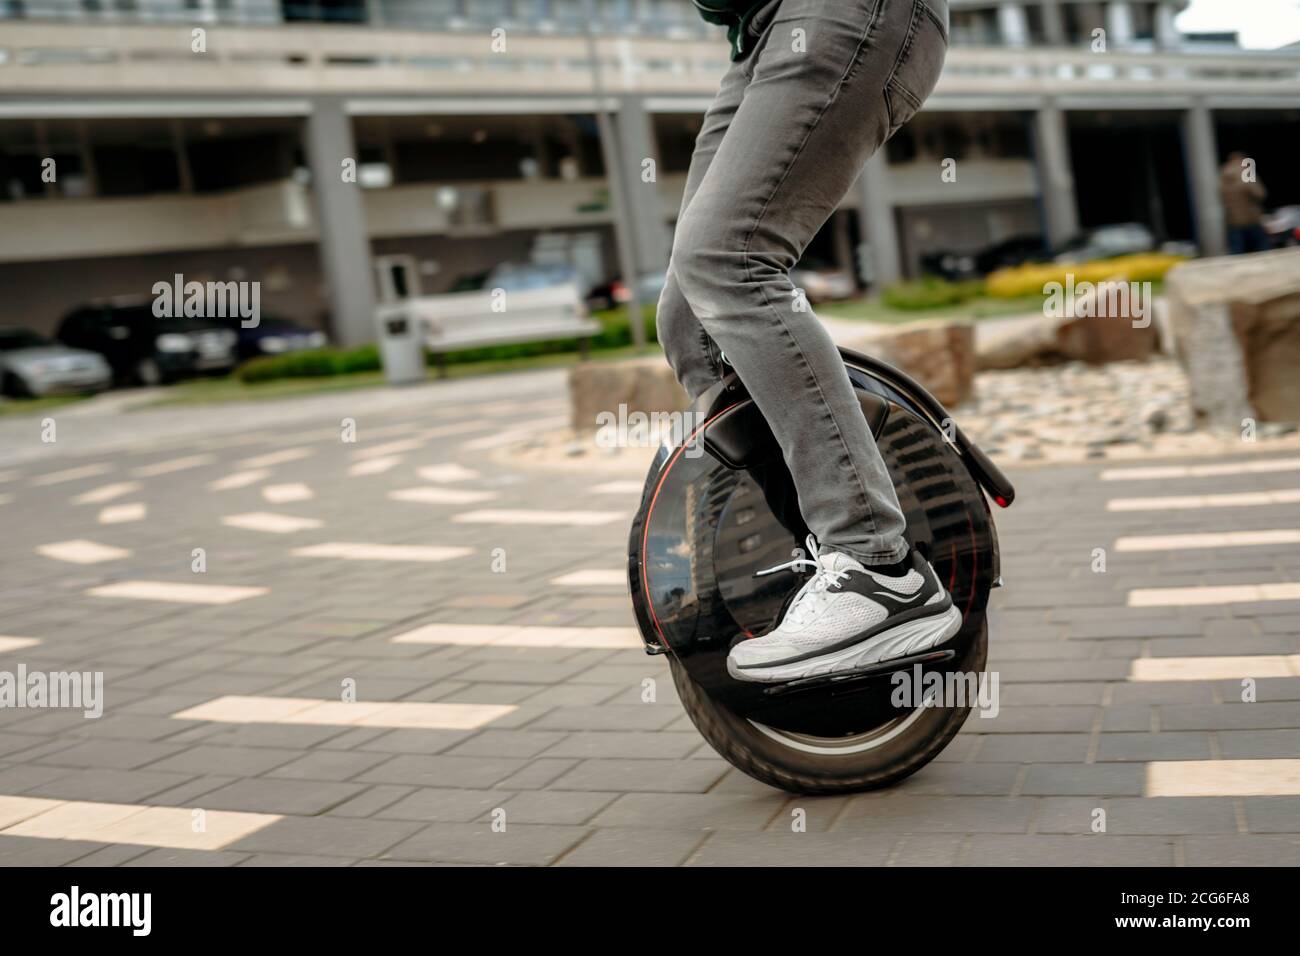 Man riding unicycle on street, electric unicycle close up. Stock Photo